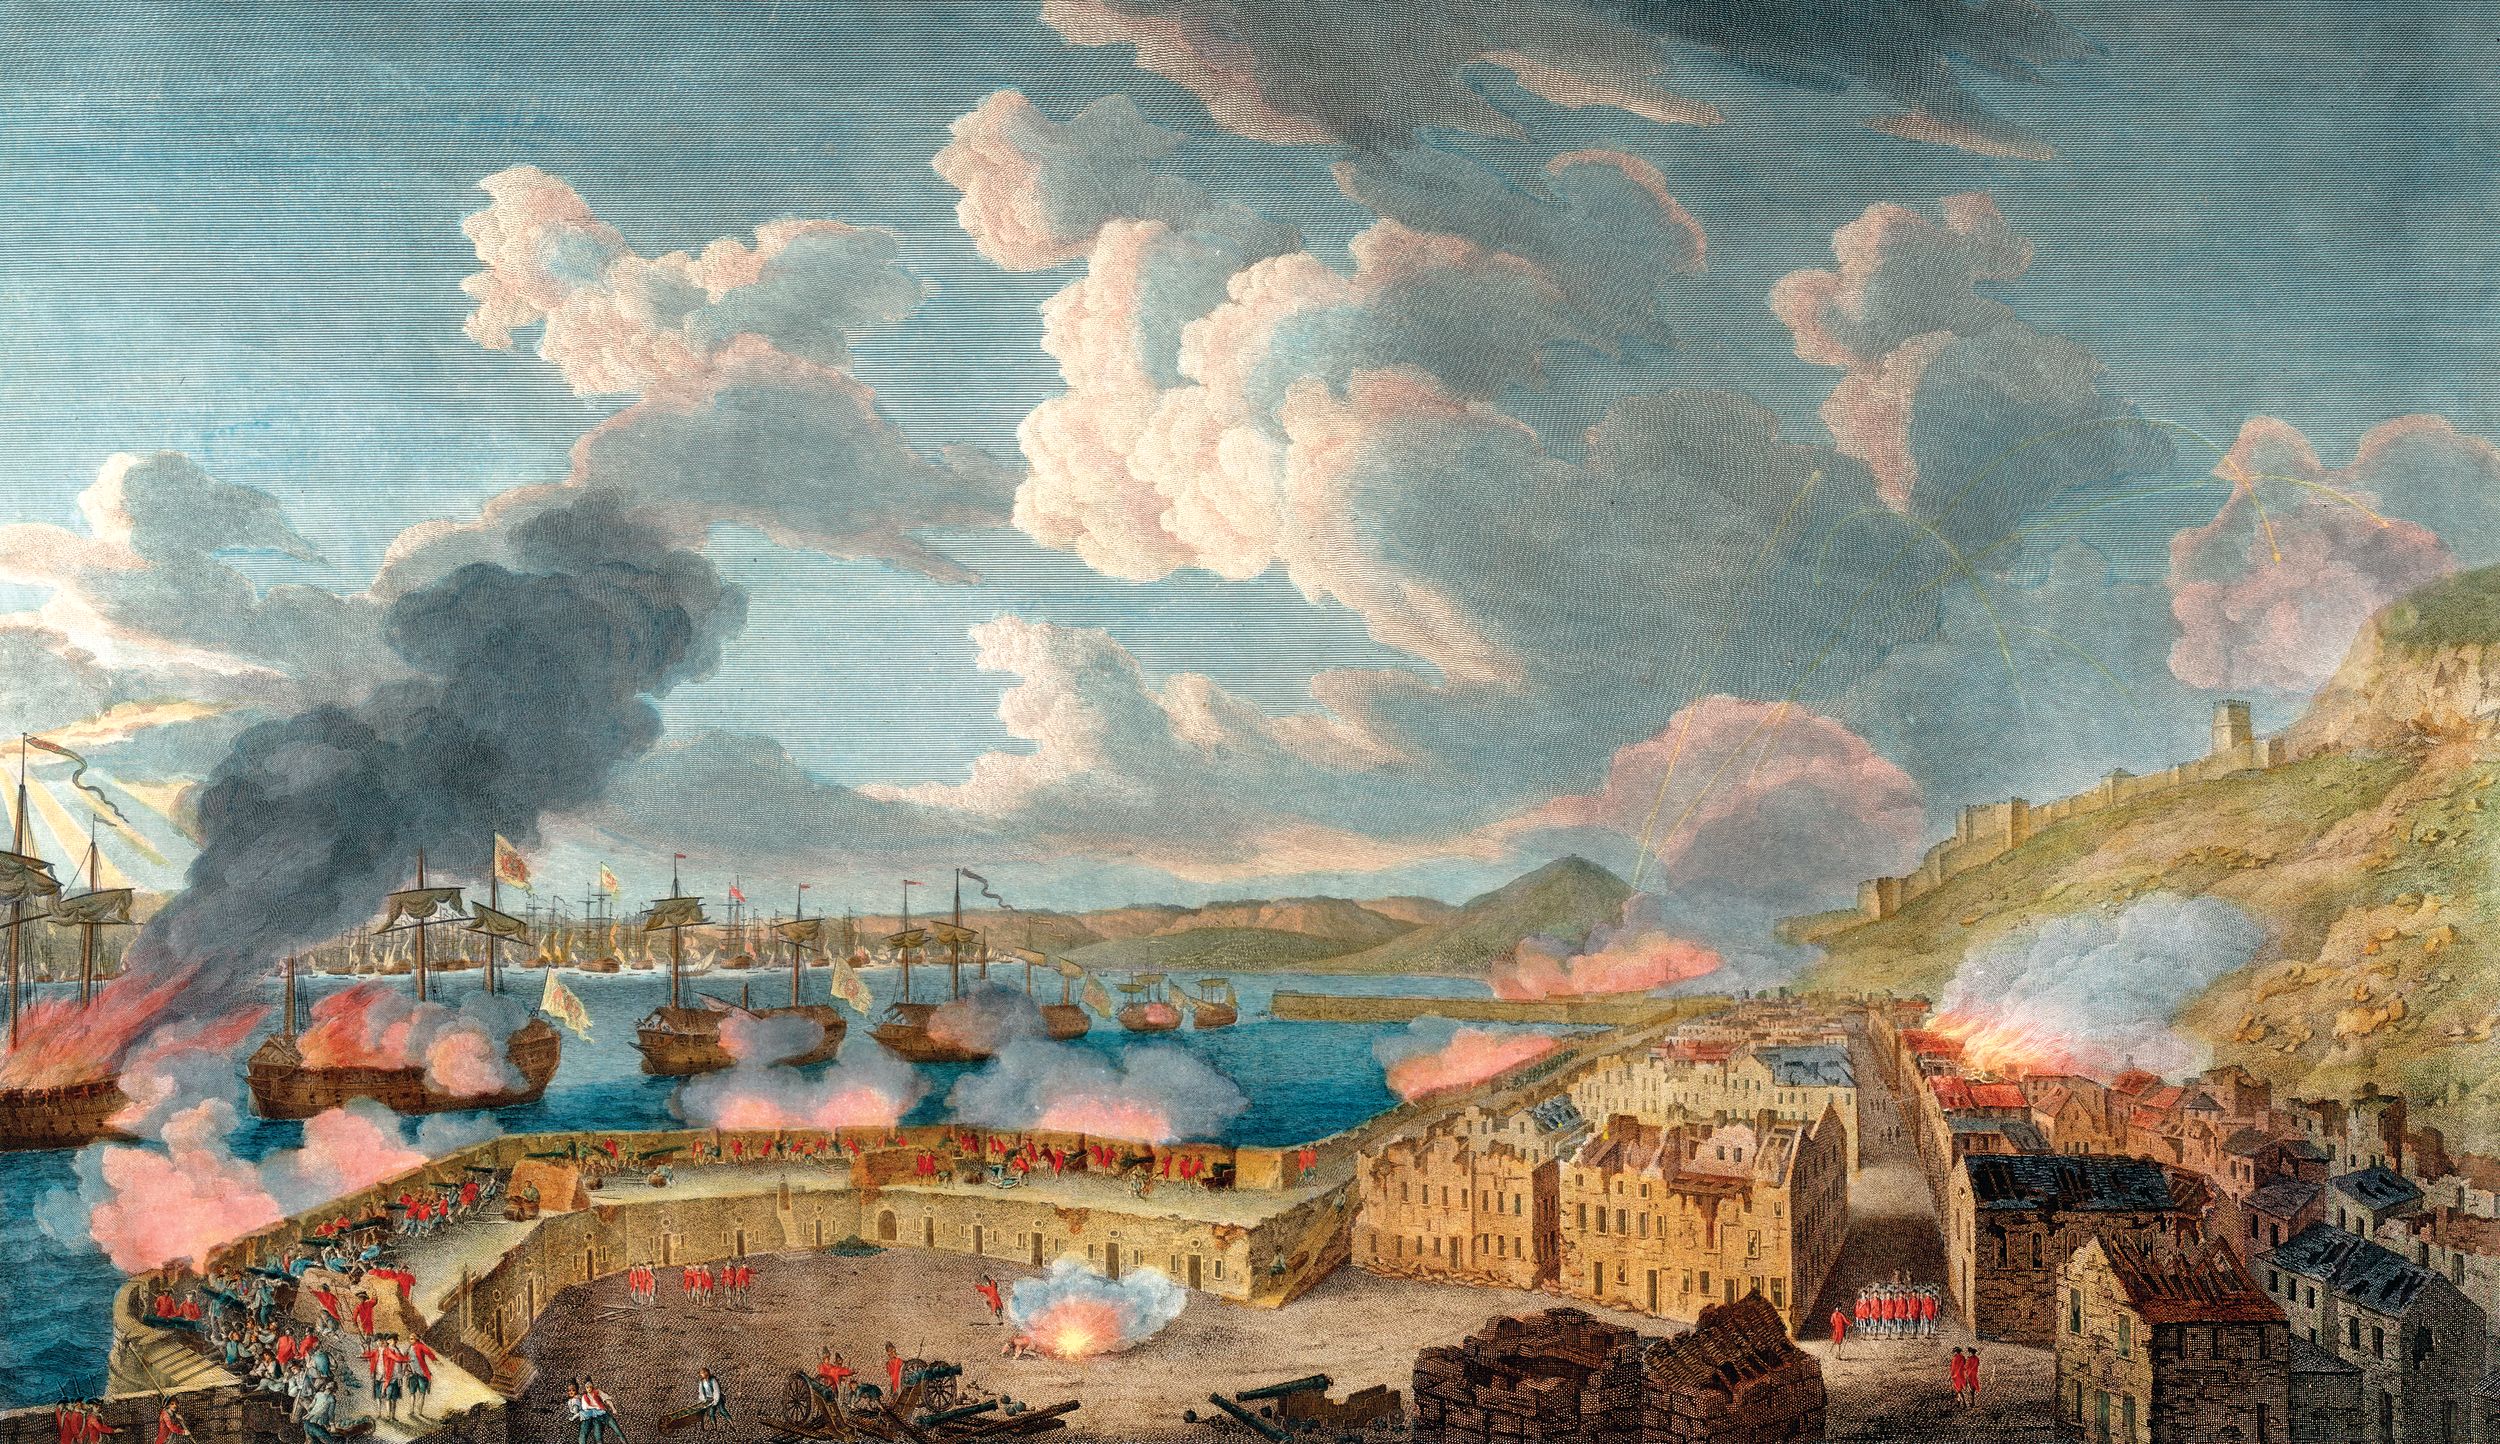 British gunners exchange fire with Spanish ships from the King’s Bastion. In spring 1781 the Spanish fired an average of 11,000 rounds a week at the British positions.